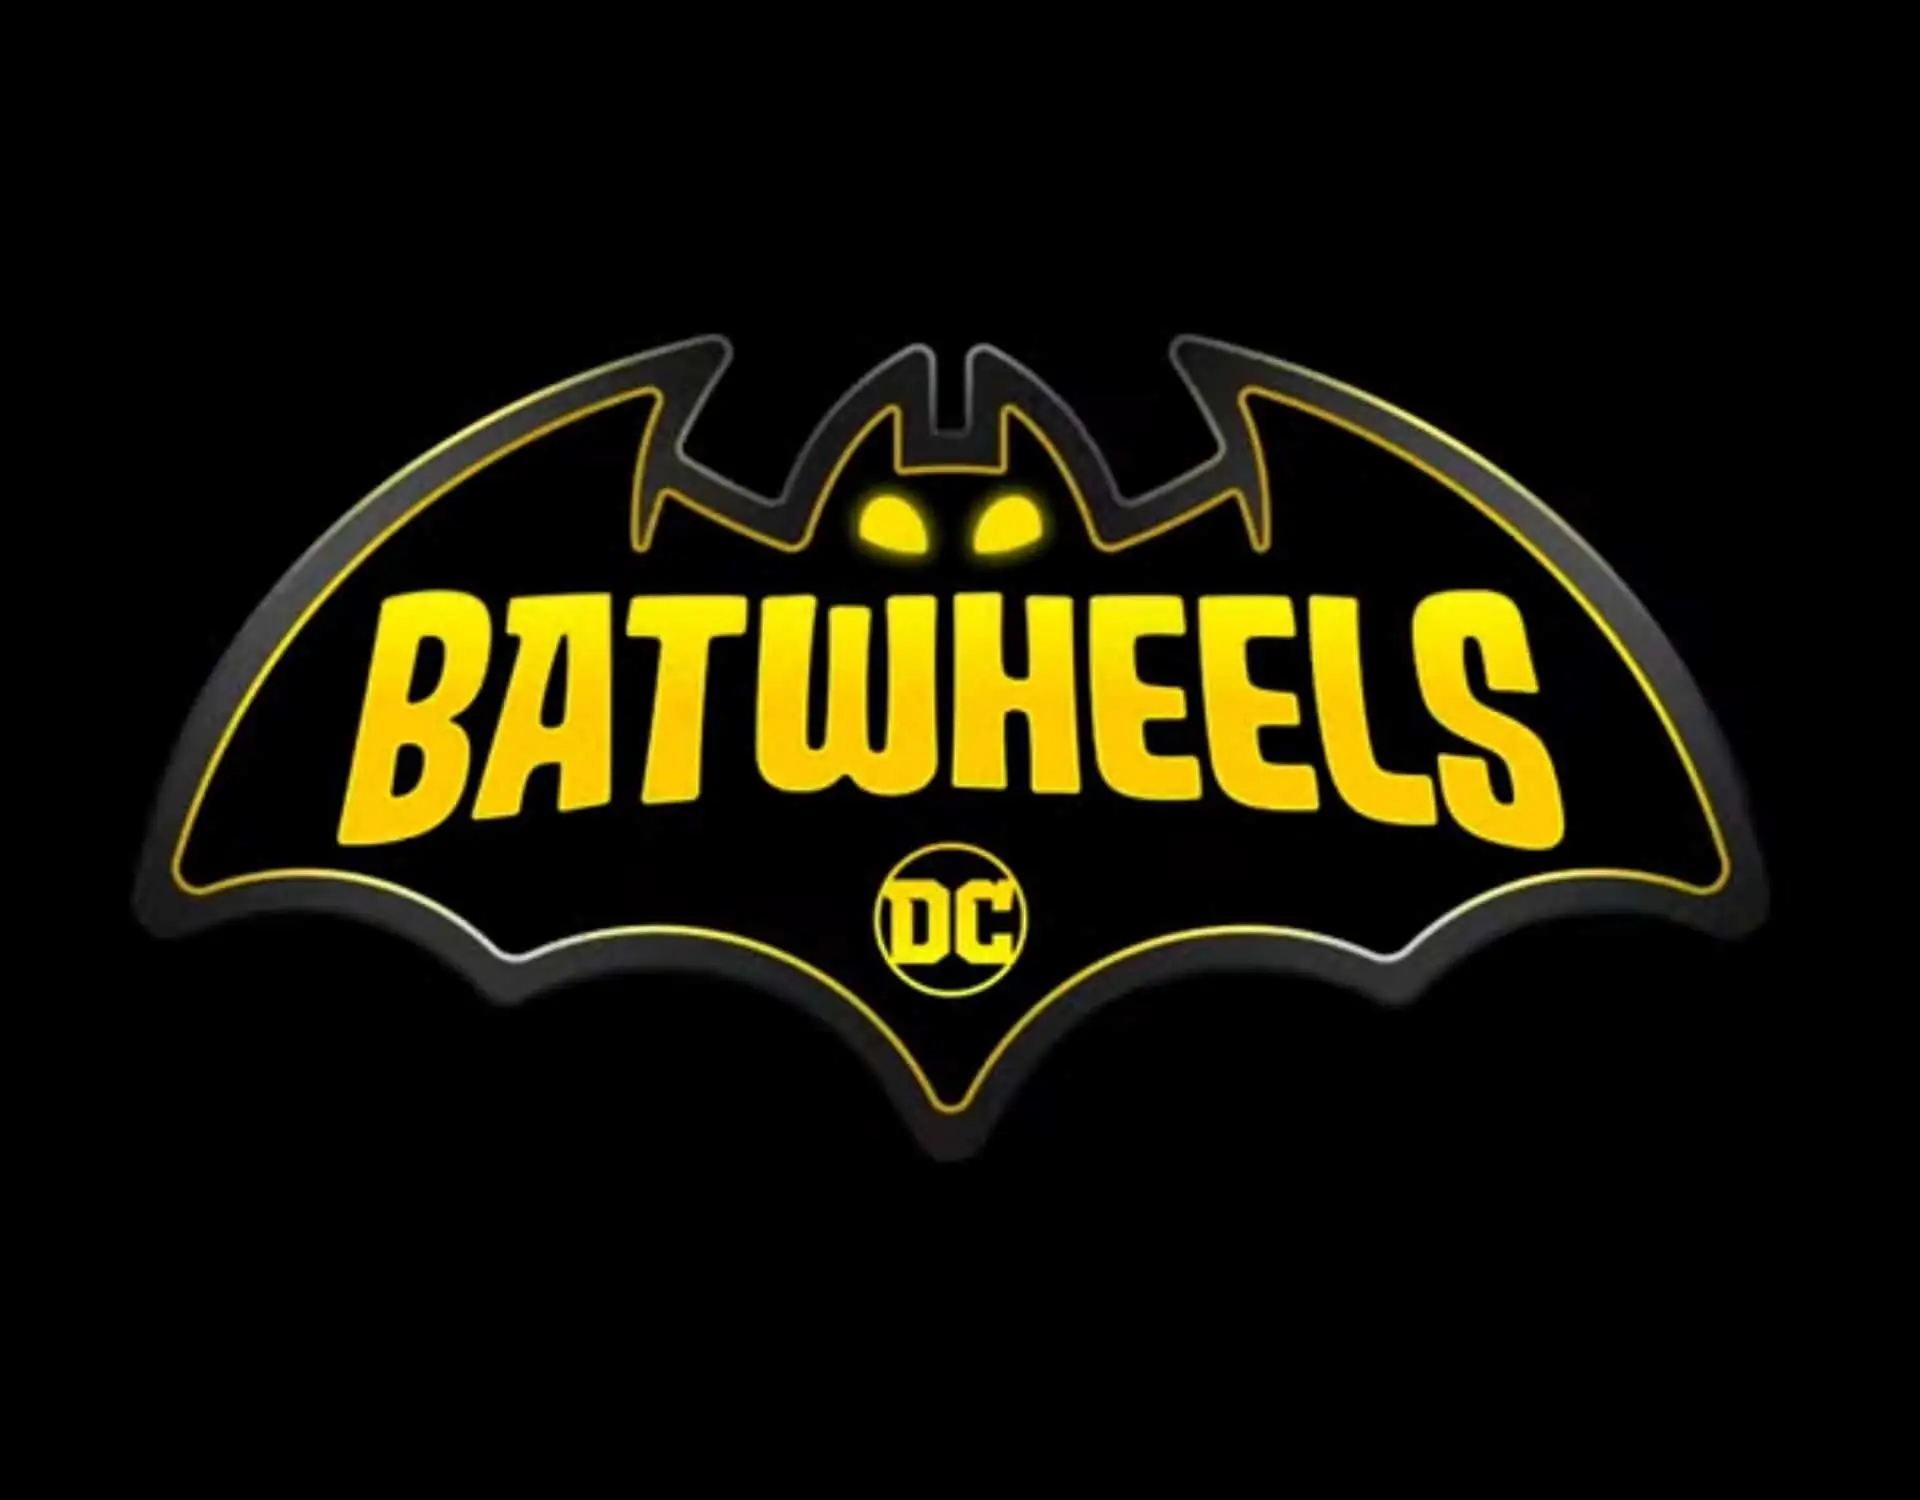 Everything You Need to Know About DC’s “Batwheels” TV Show